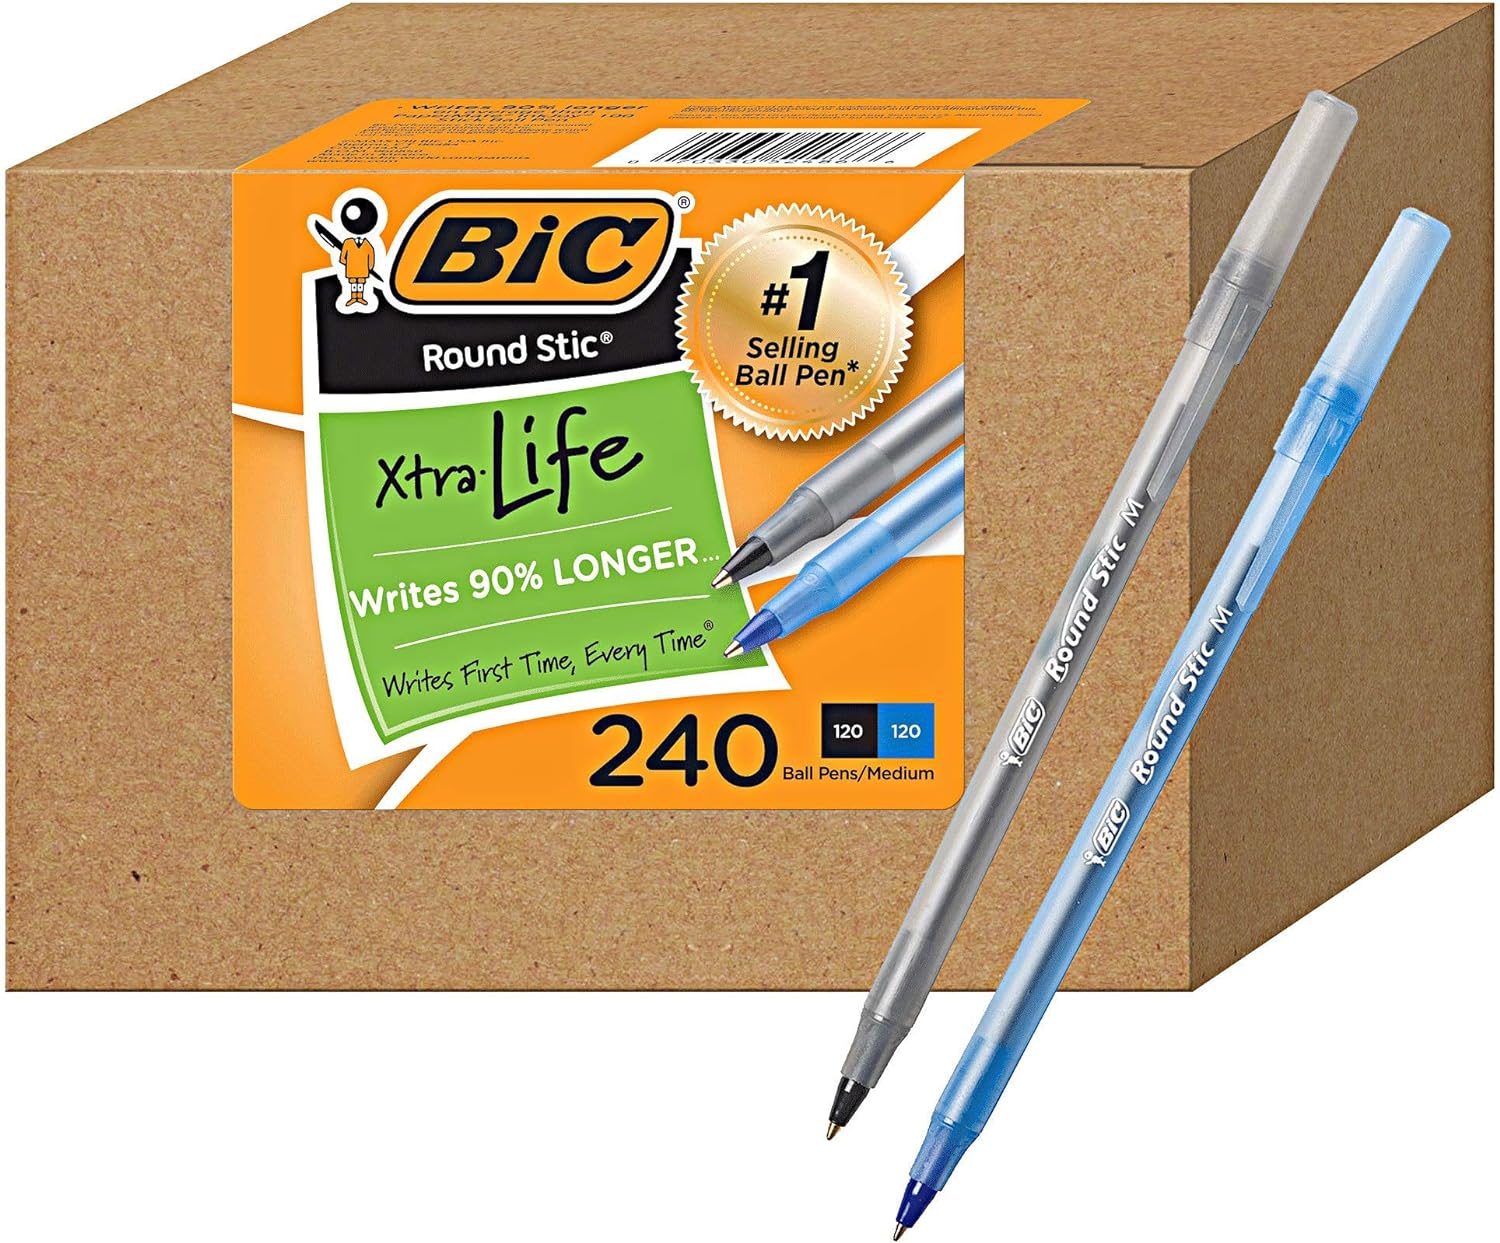 We've been purchasing these in bulk for years. They are consistently the best priced, best quality, bulk pens. They write for a long time, never leak and the caps are more reliable than other capped pens or spring loaded pens. We give them away, toss them in purses, backpacks, car doors, glove boxes and jacket pockets.